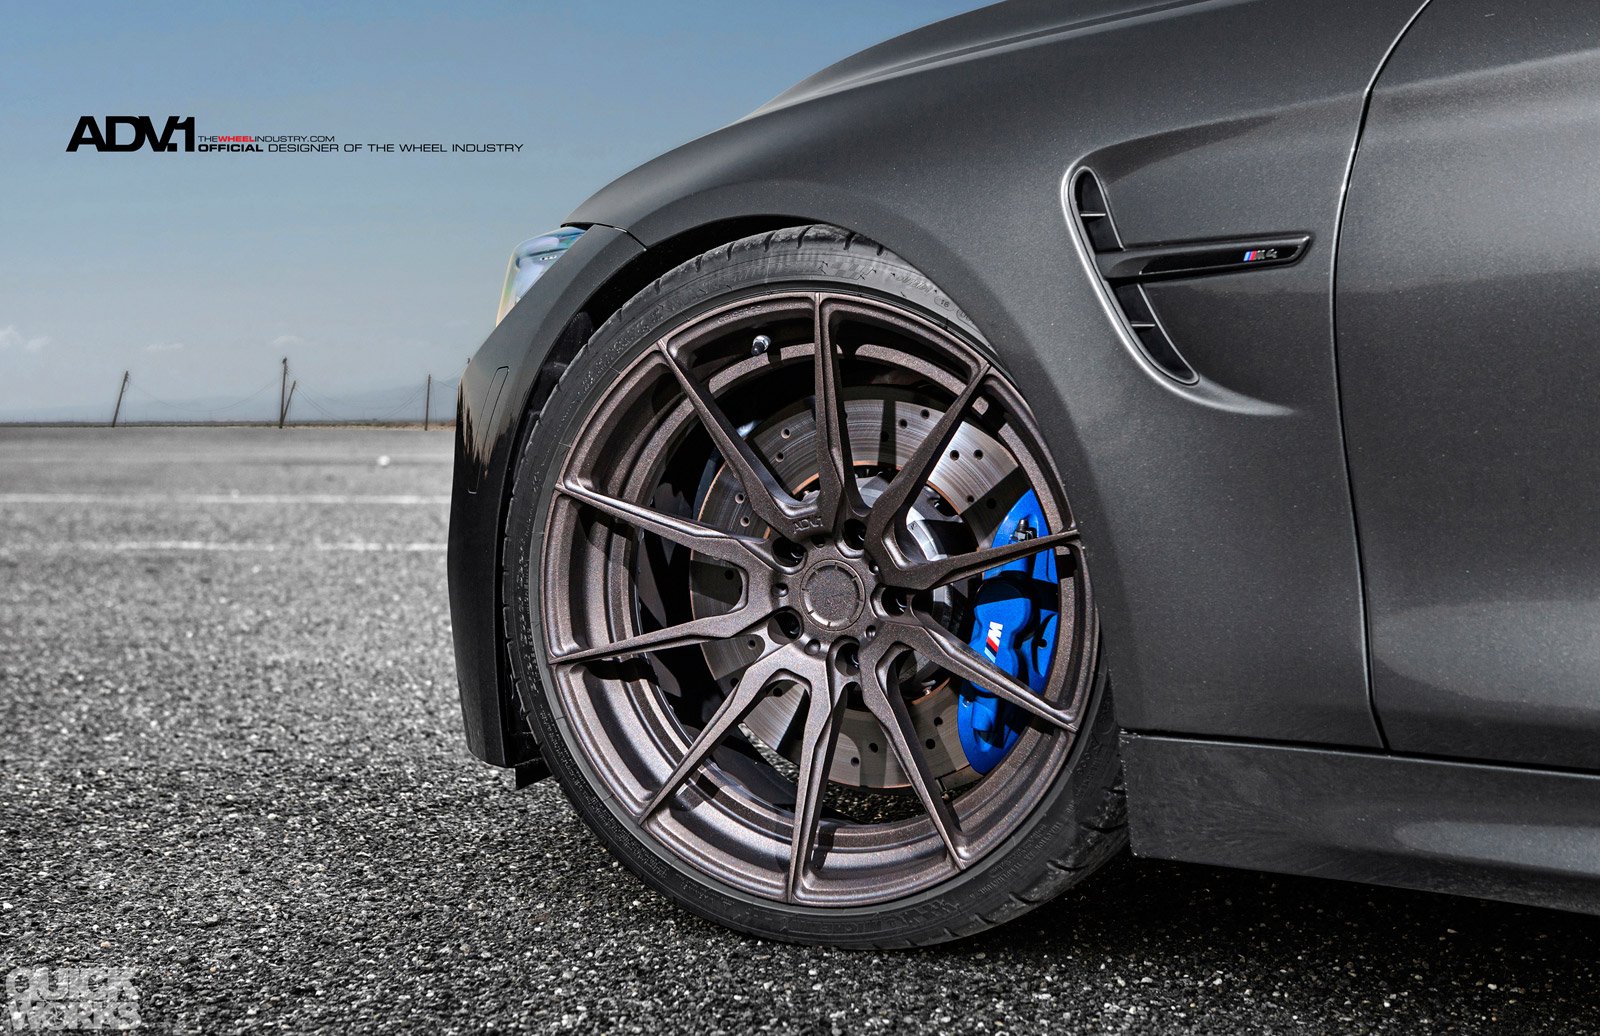 2014, Adv1, Wheel, Tuning, Bmw, M4, Coupe, Cars Wallpaper